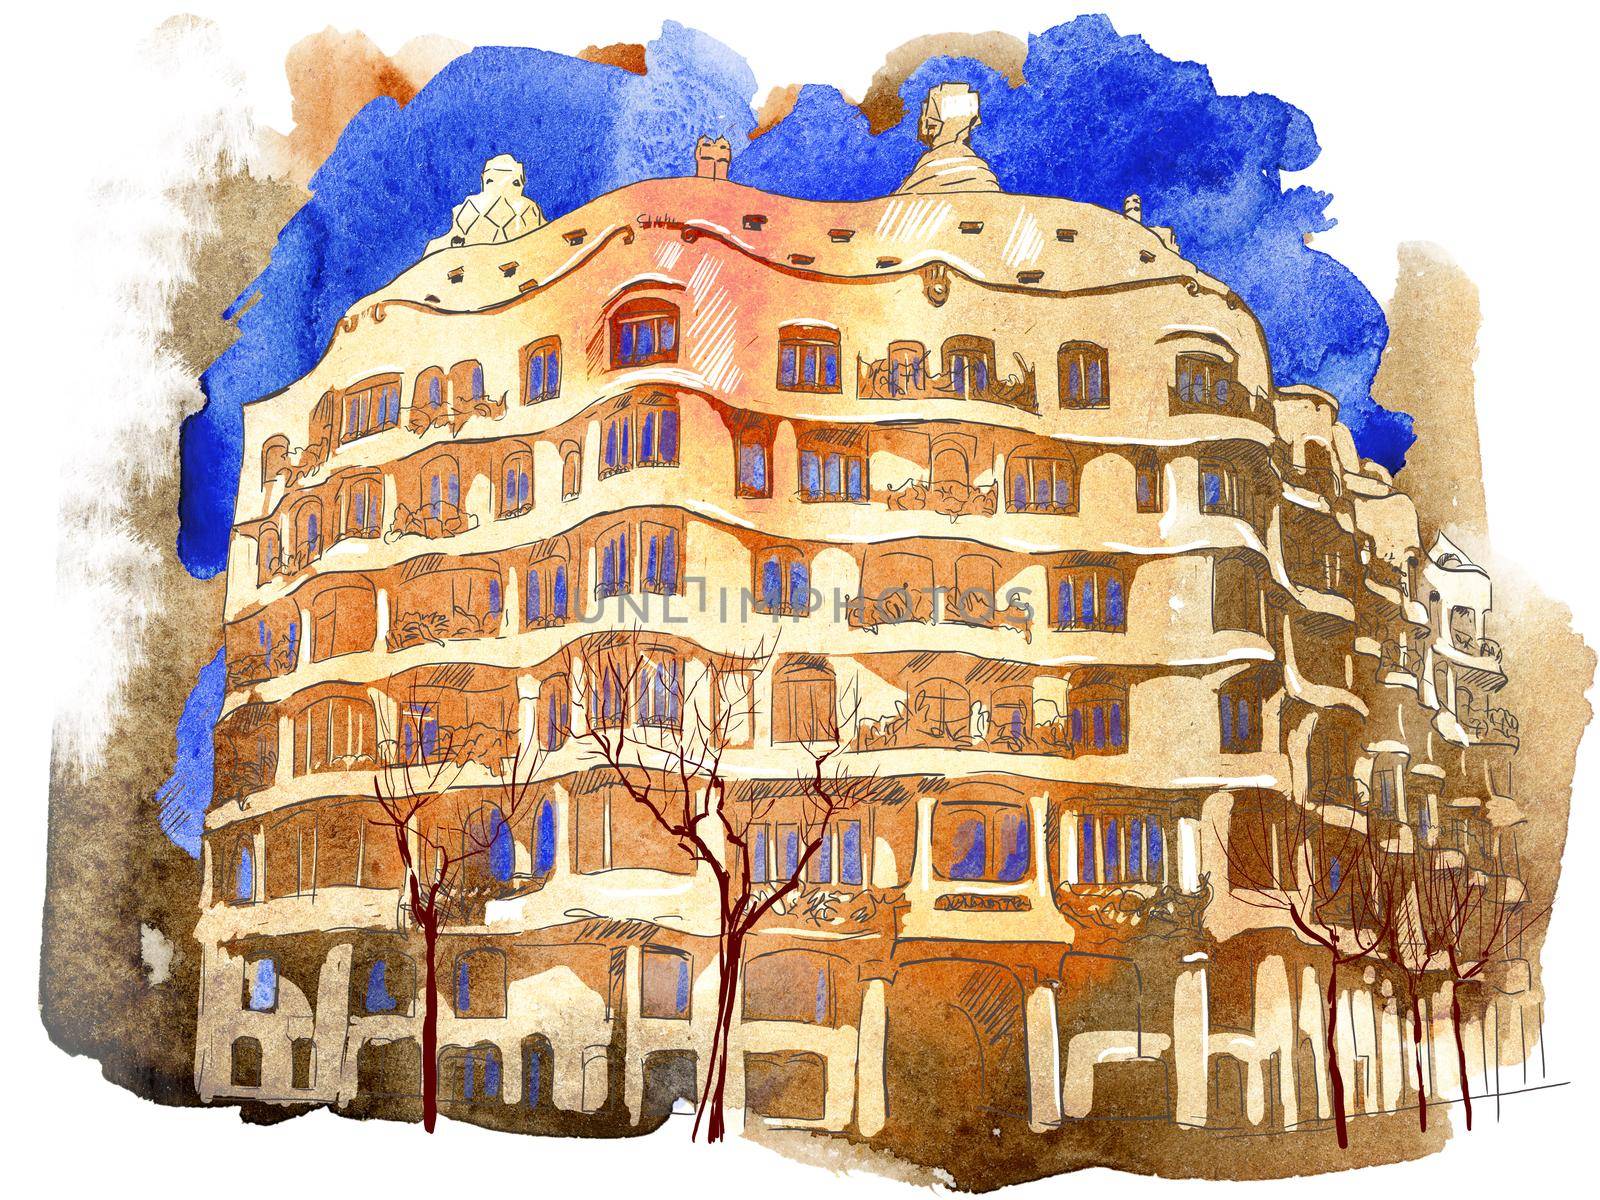 Watercolor illustration of the building by NataOmsk